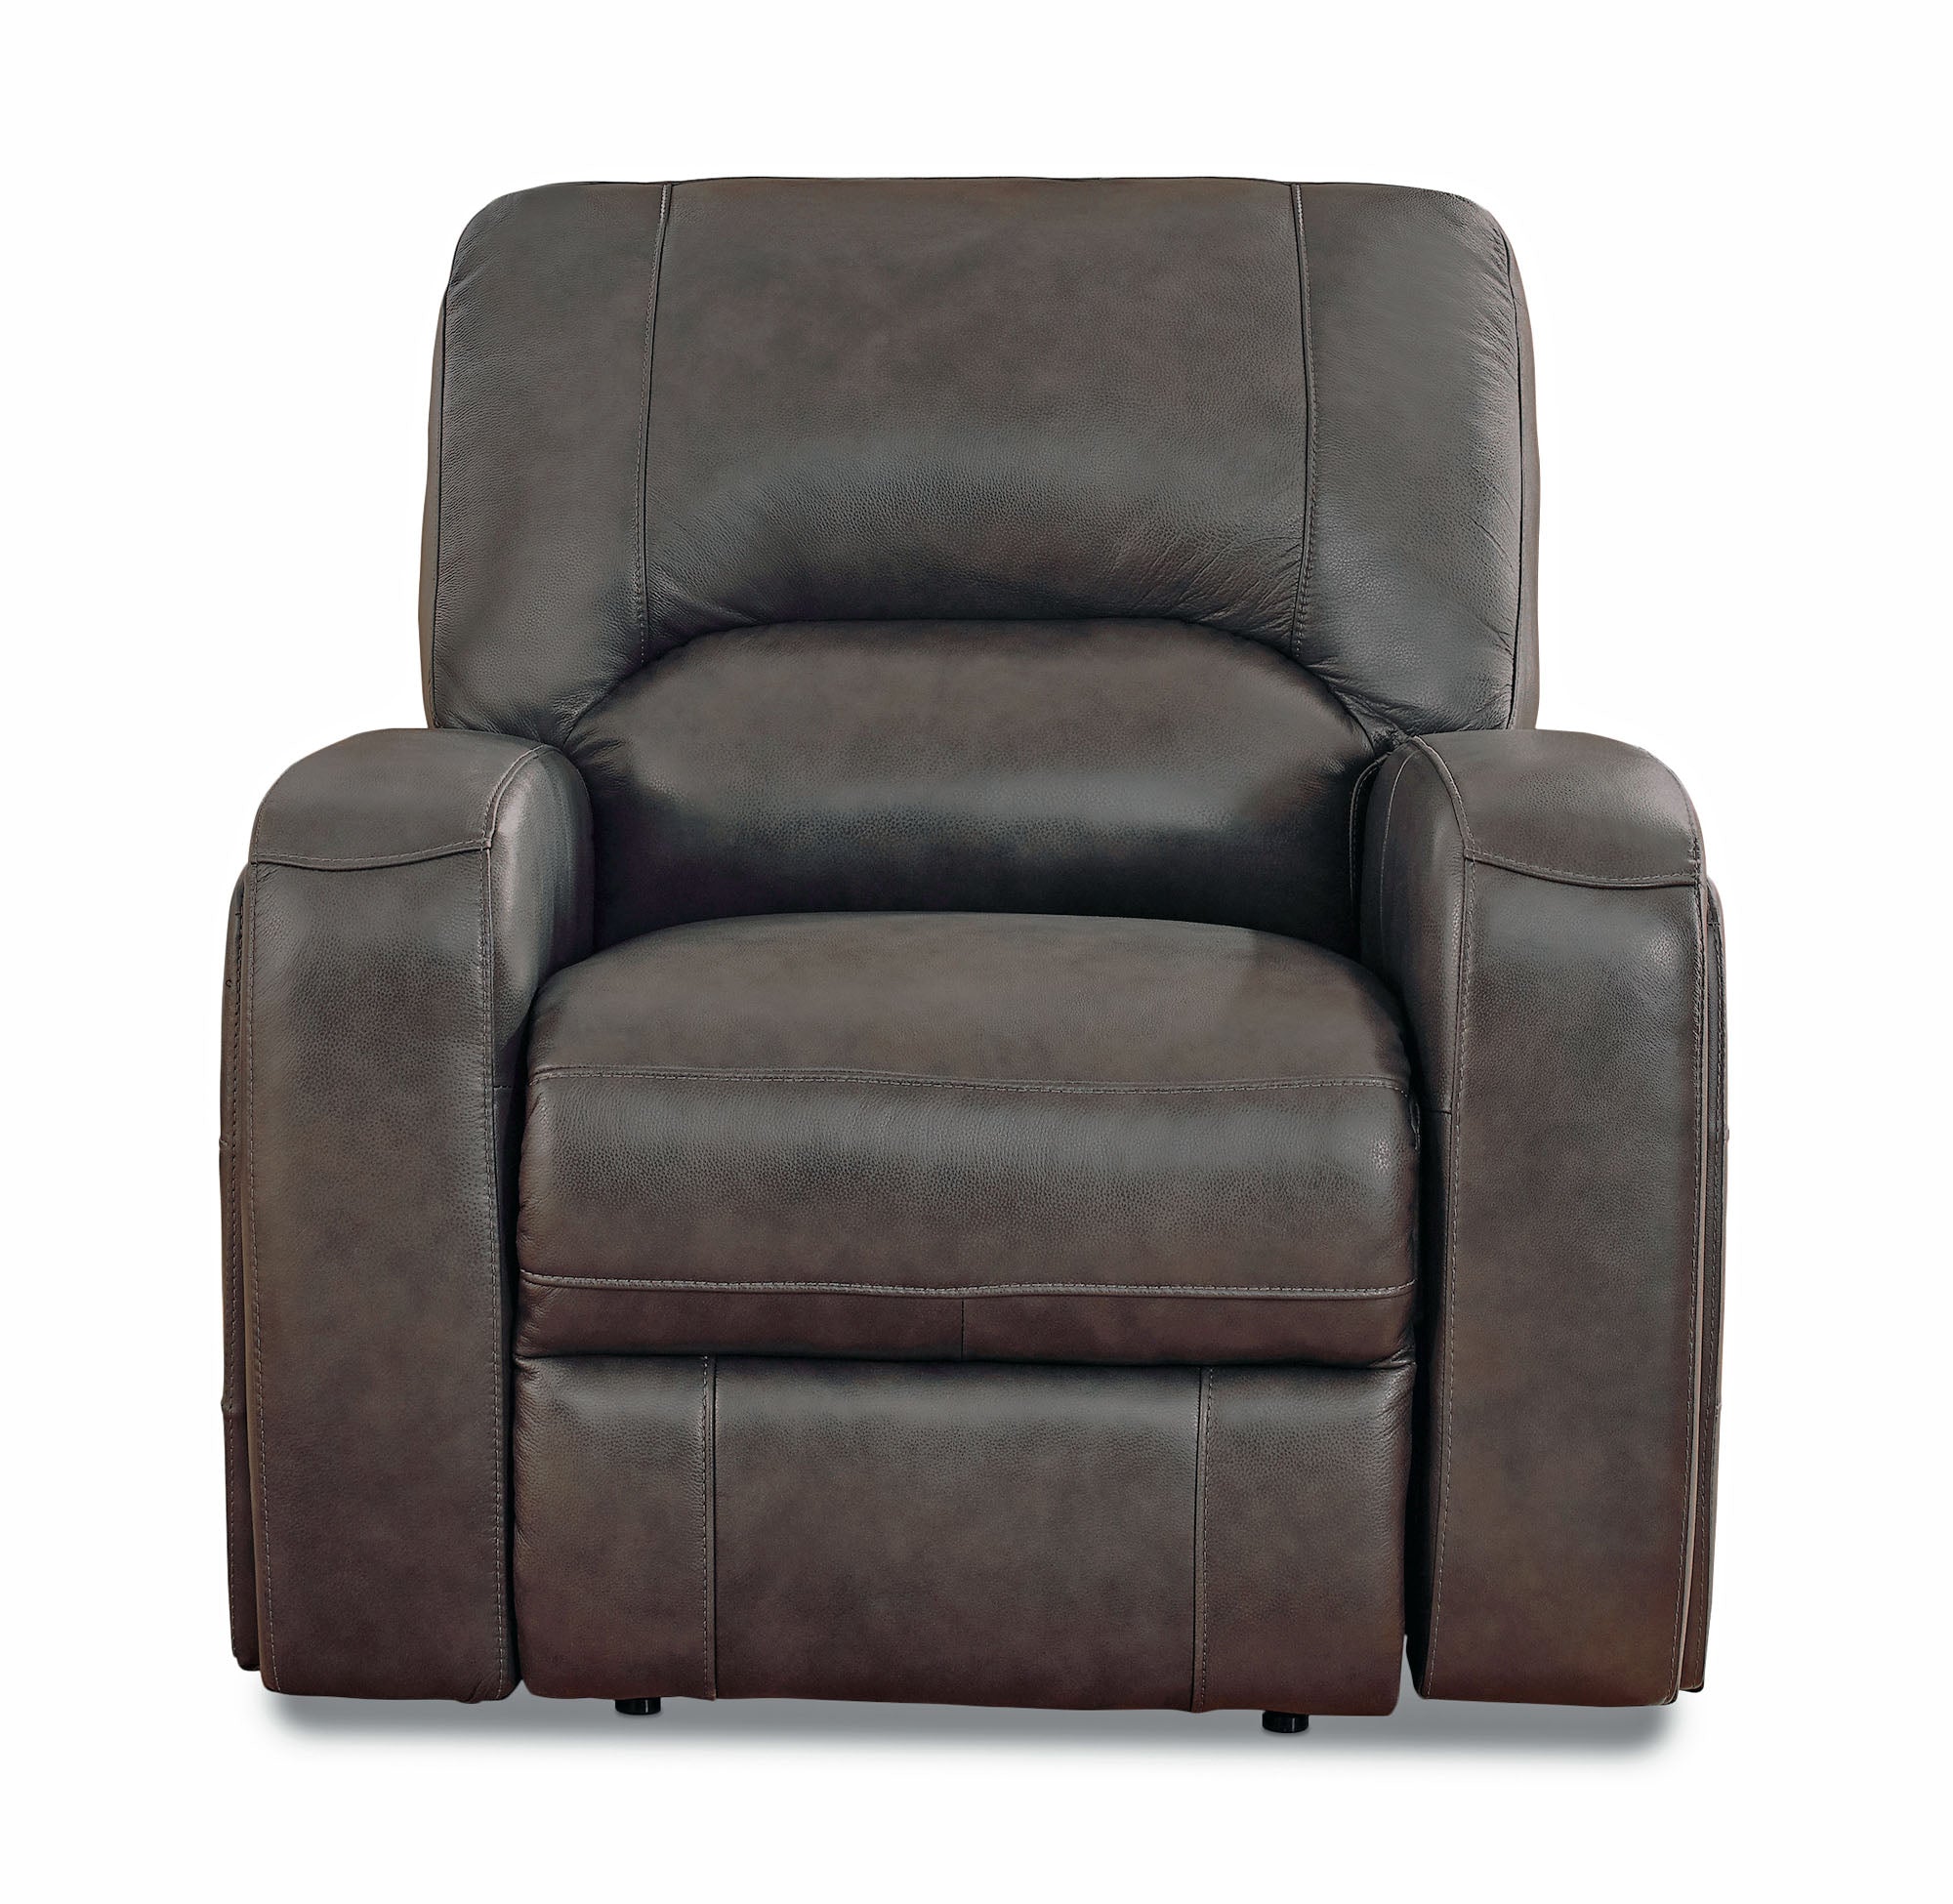 Newcastle Gray Leather Power Reclining Chair - MJM Furniture